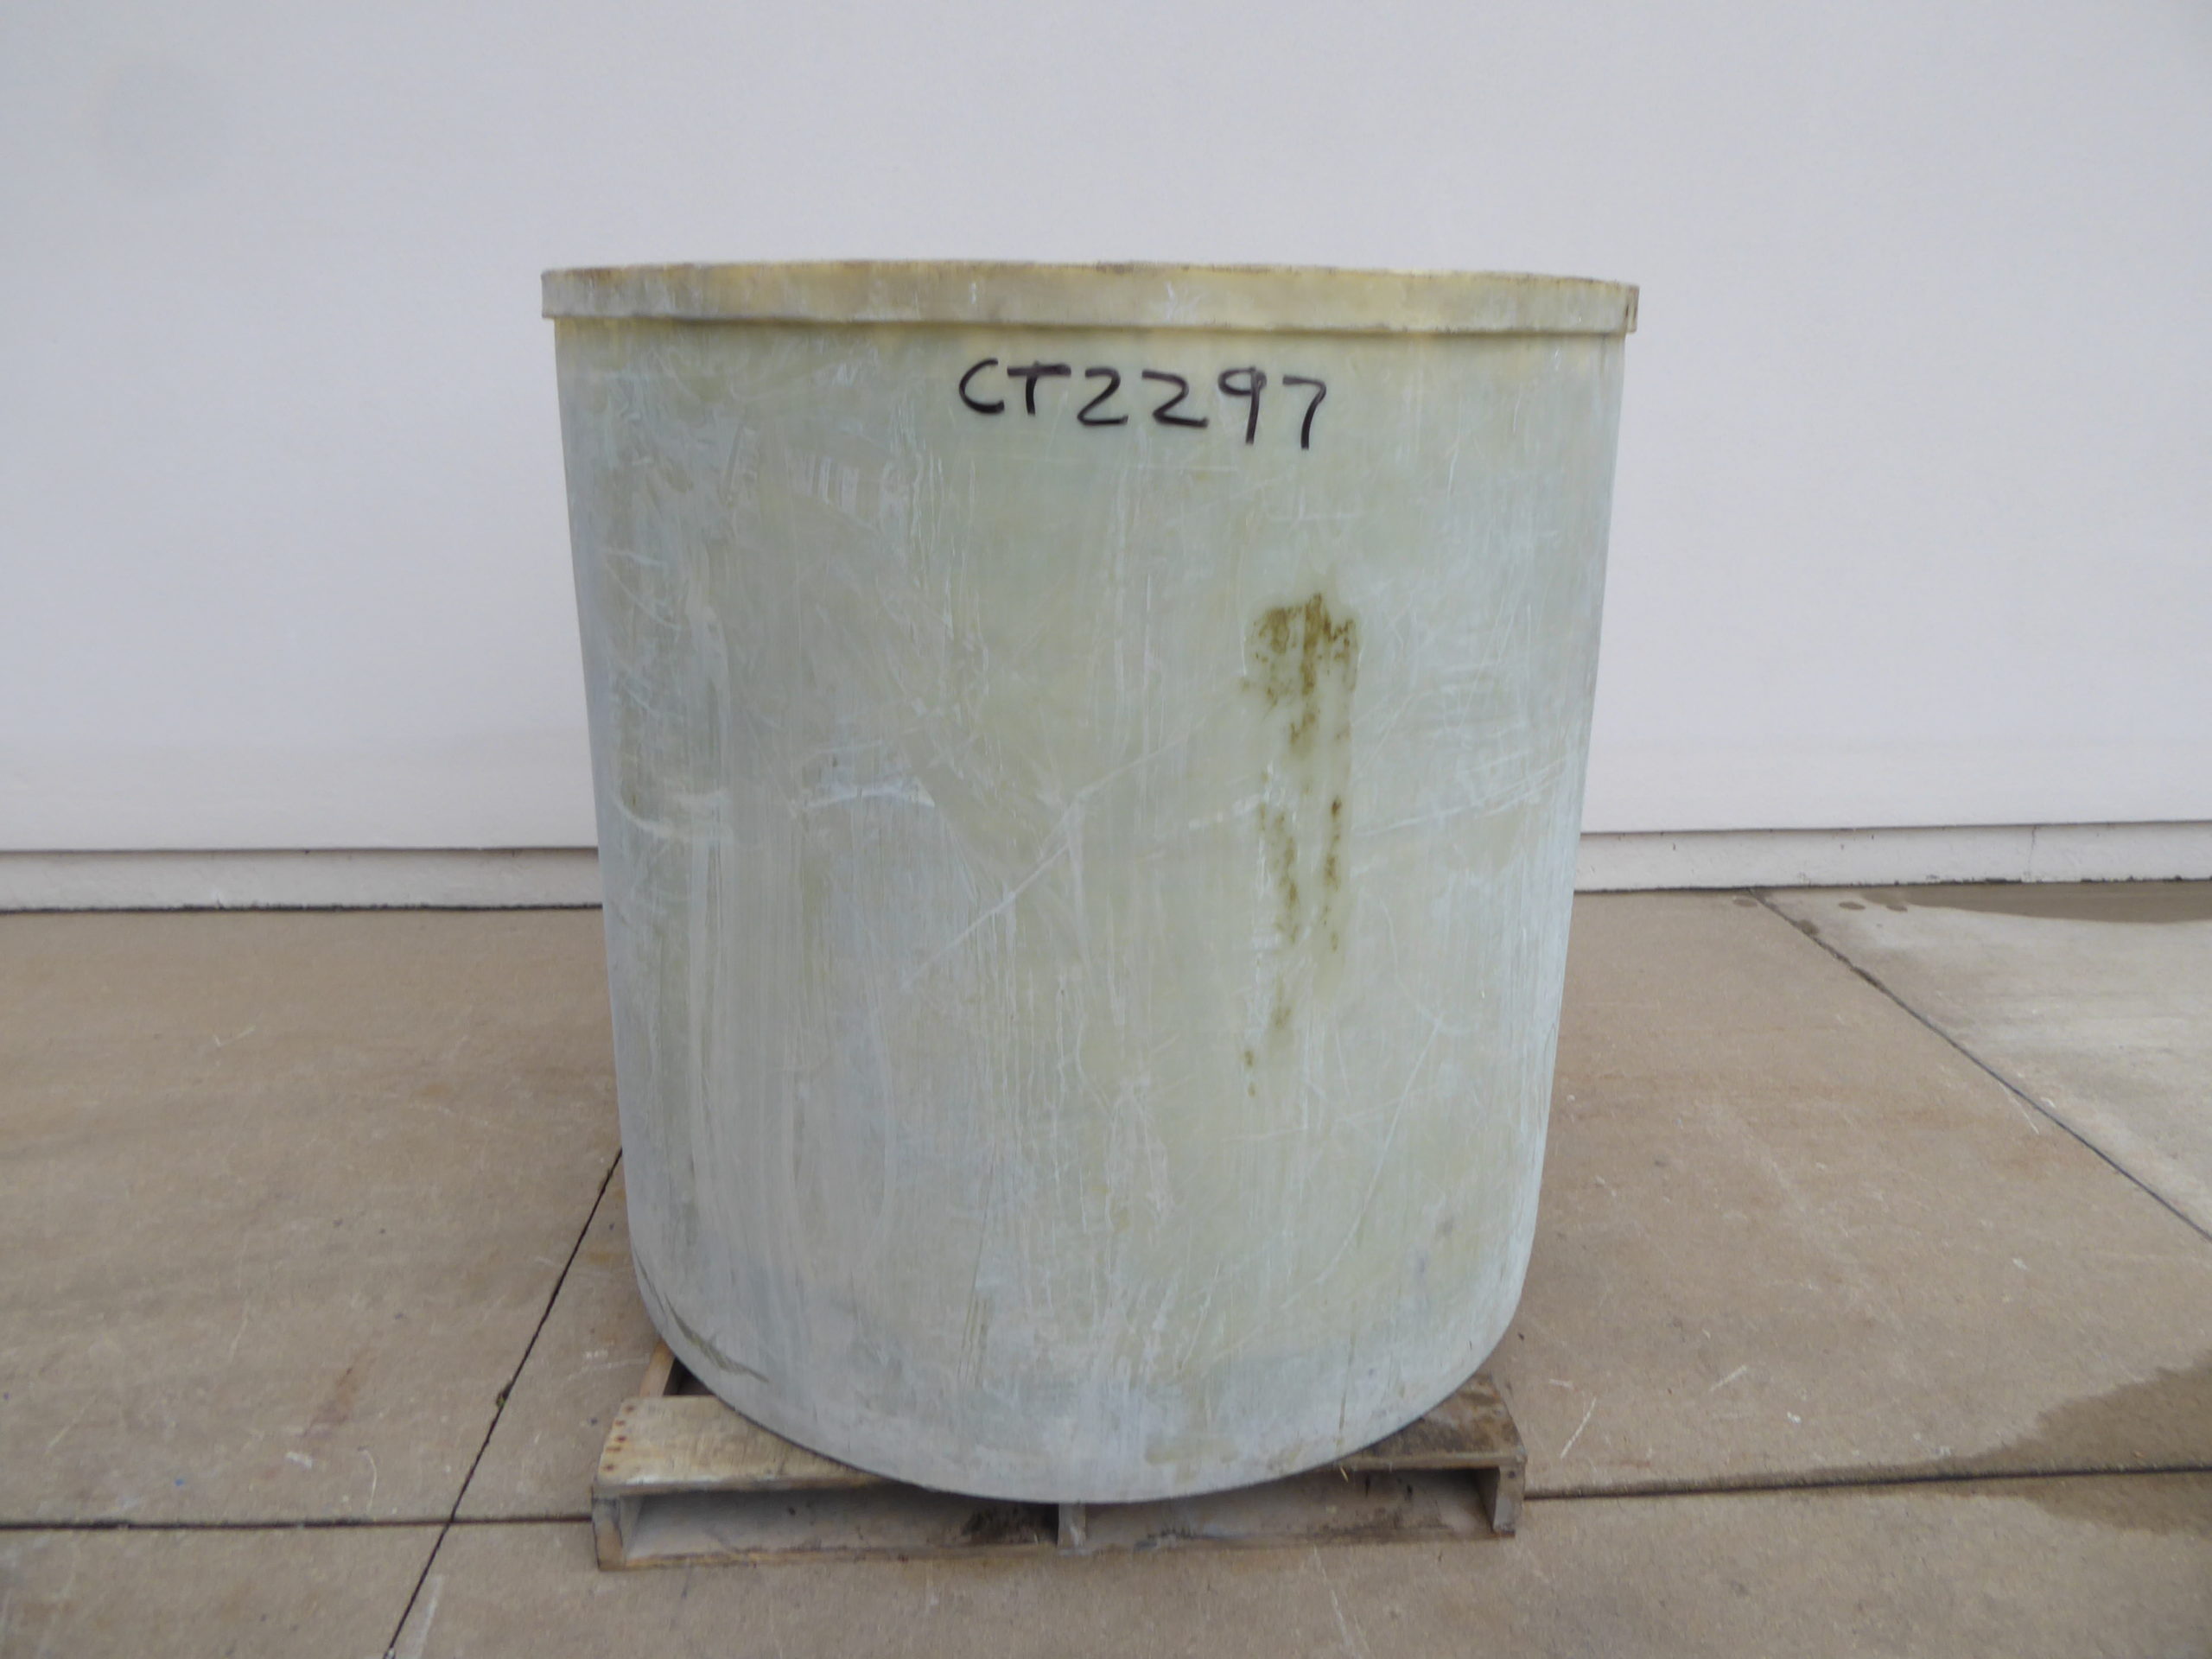 Used Cylindrical Tank - 350 Gallon Poly Round Tank CT2297-Tanks-Cylindrical